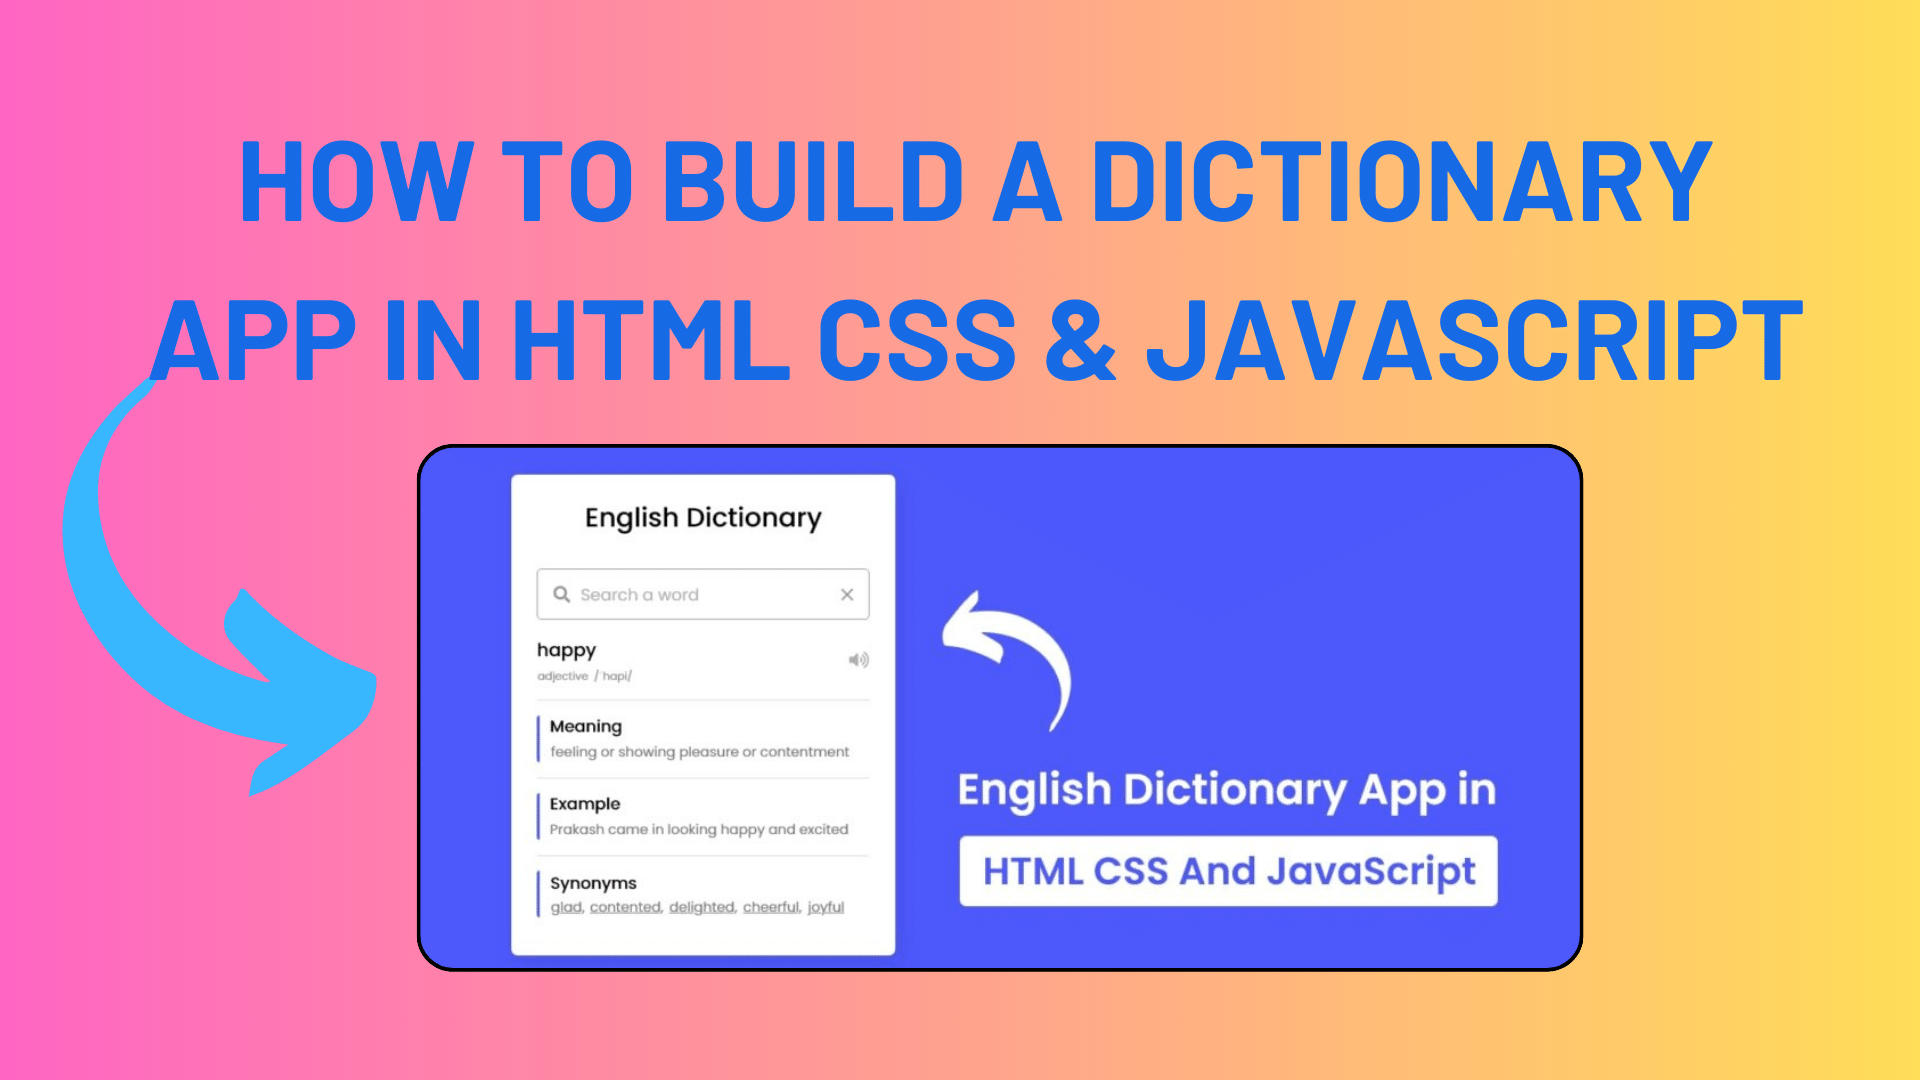 How To Build A Dictionary App in HTML CSS & JavaScript